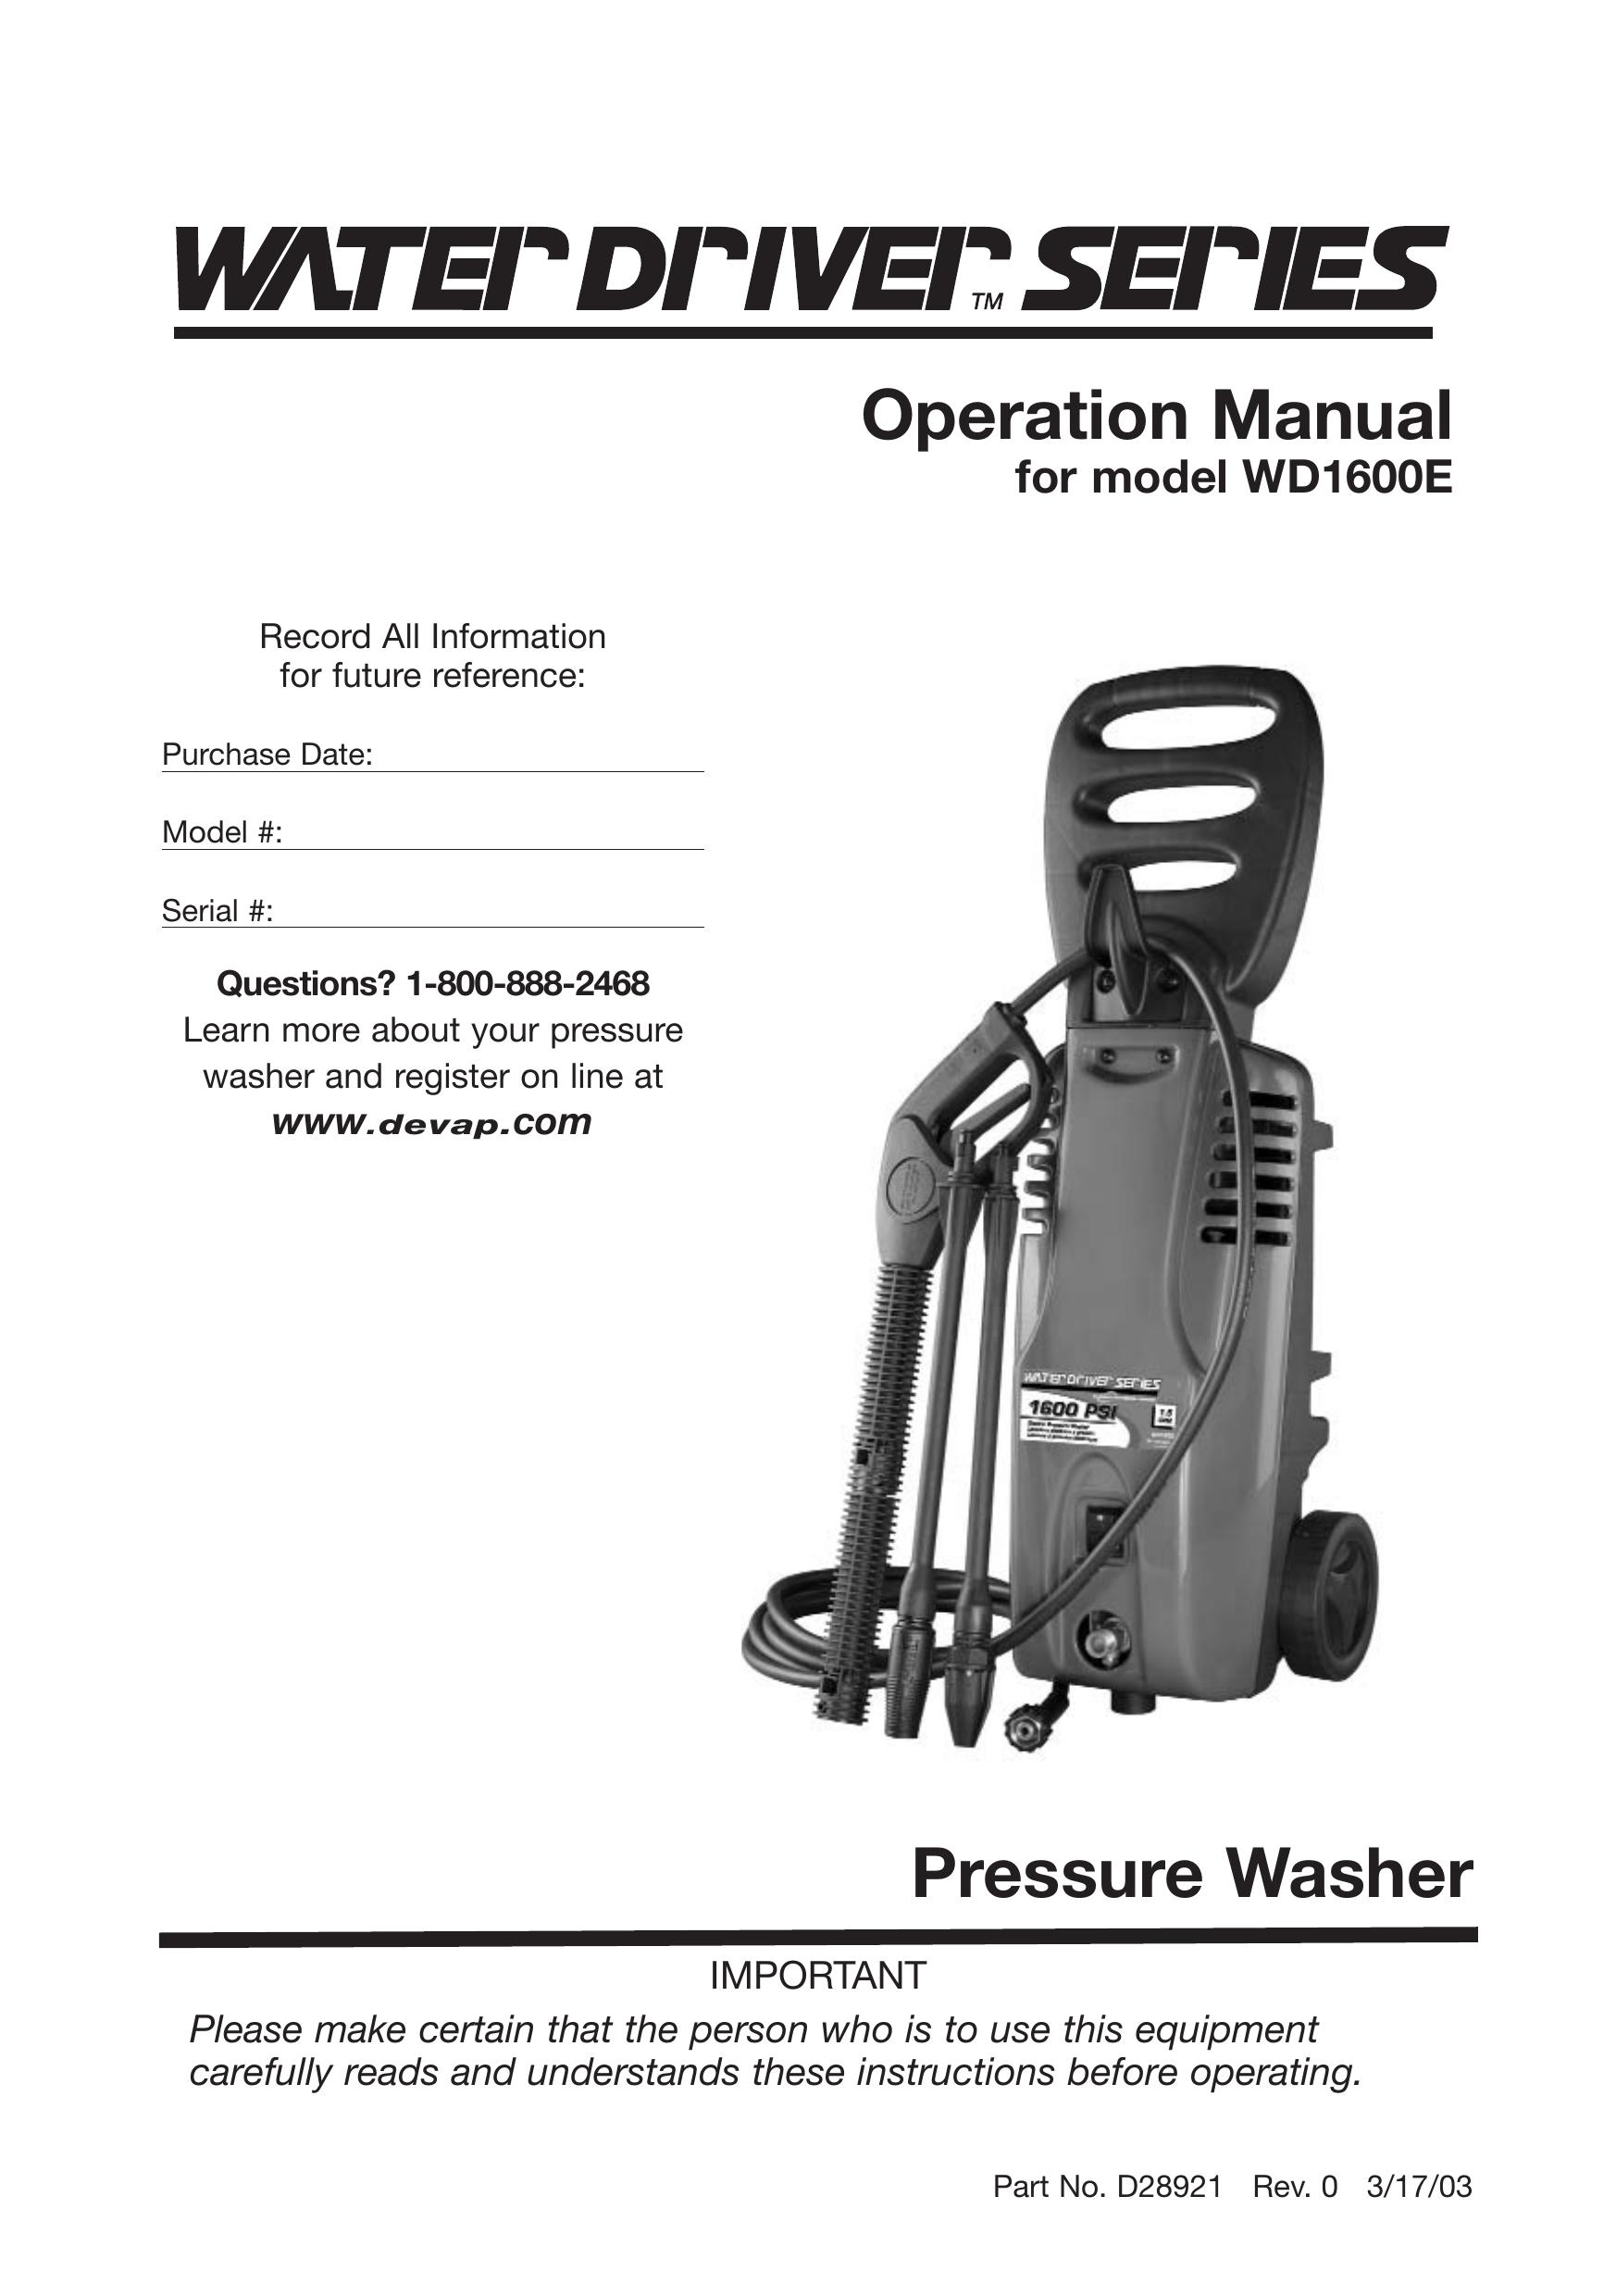 DeVillbiss Air Power Company D28921 Pressure Washer User Manual